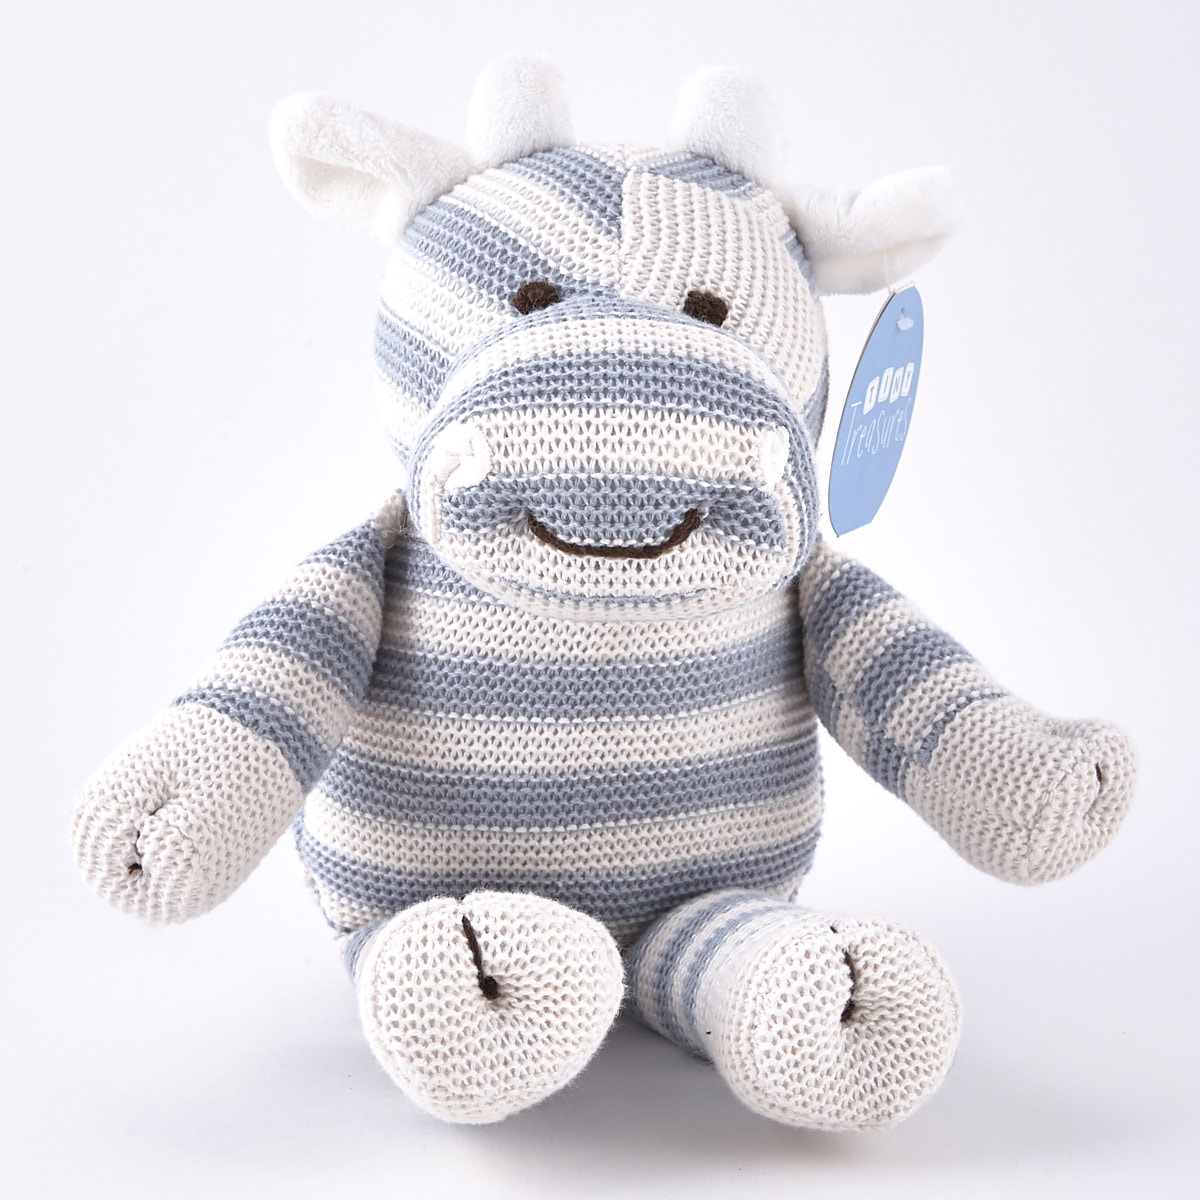 Buy Tiny Treasures Striped Blue & White Cow Plush for GBP 2.99 | Card ...